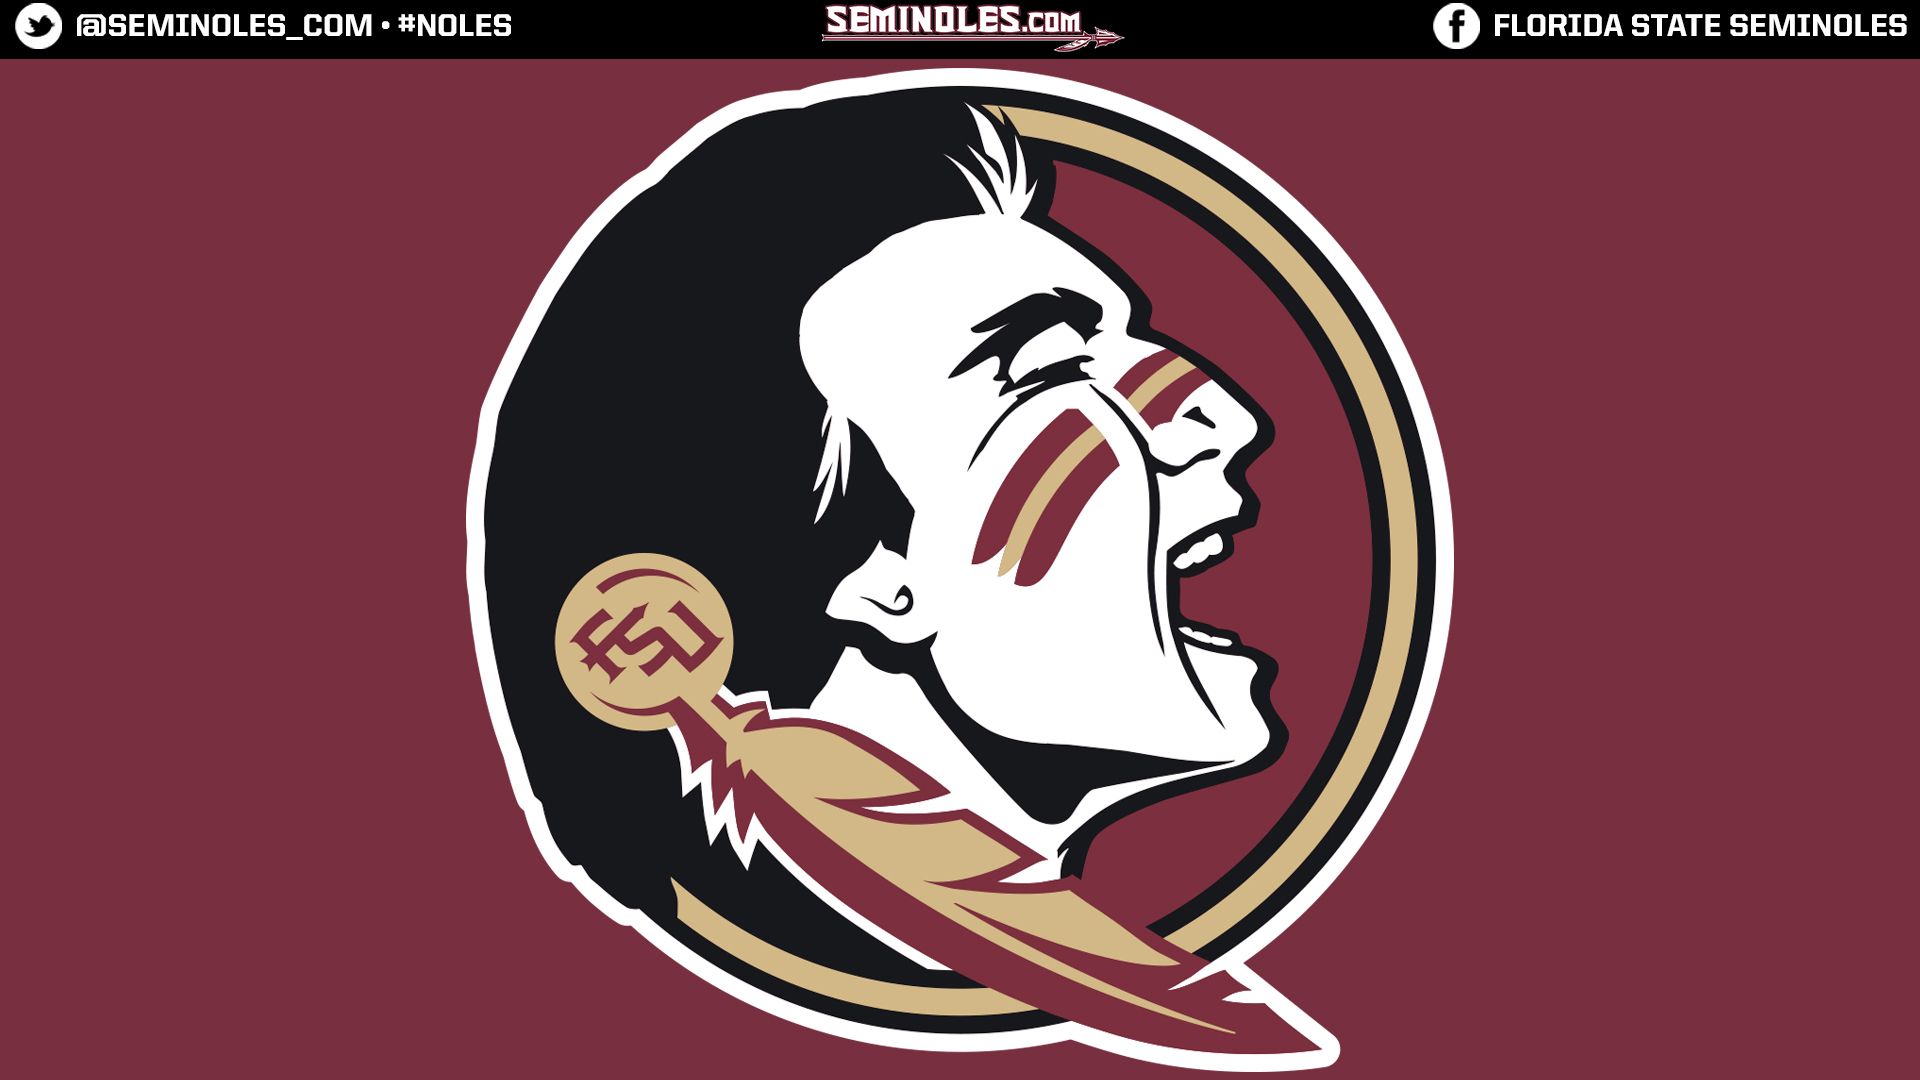 Florida State Seminoles Wallpapers Browser Themes 1920x1080